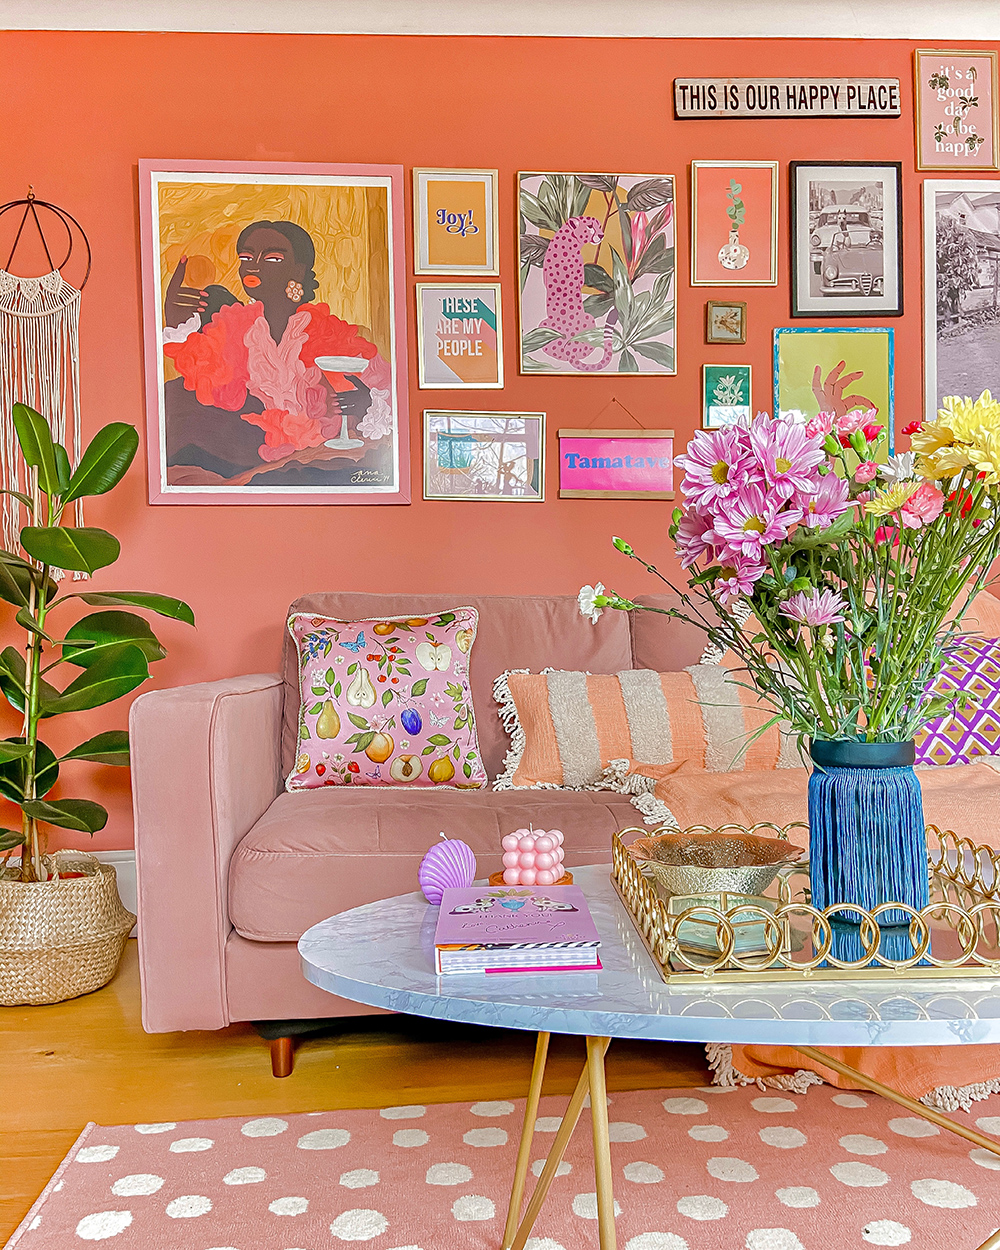 Peach and pink living room decor with a quirky gallery wall and pink velvet sofa